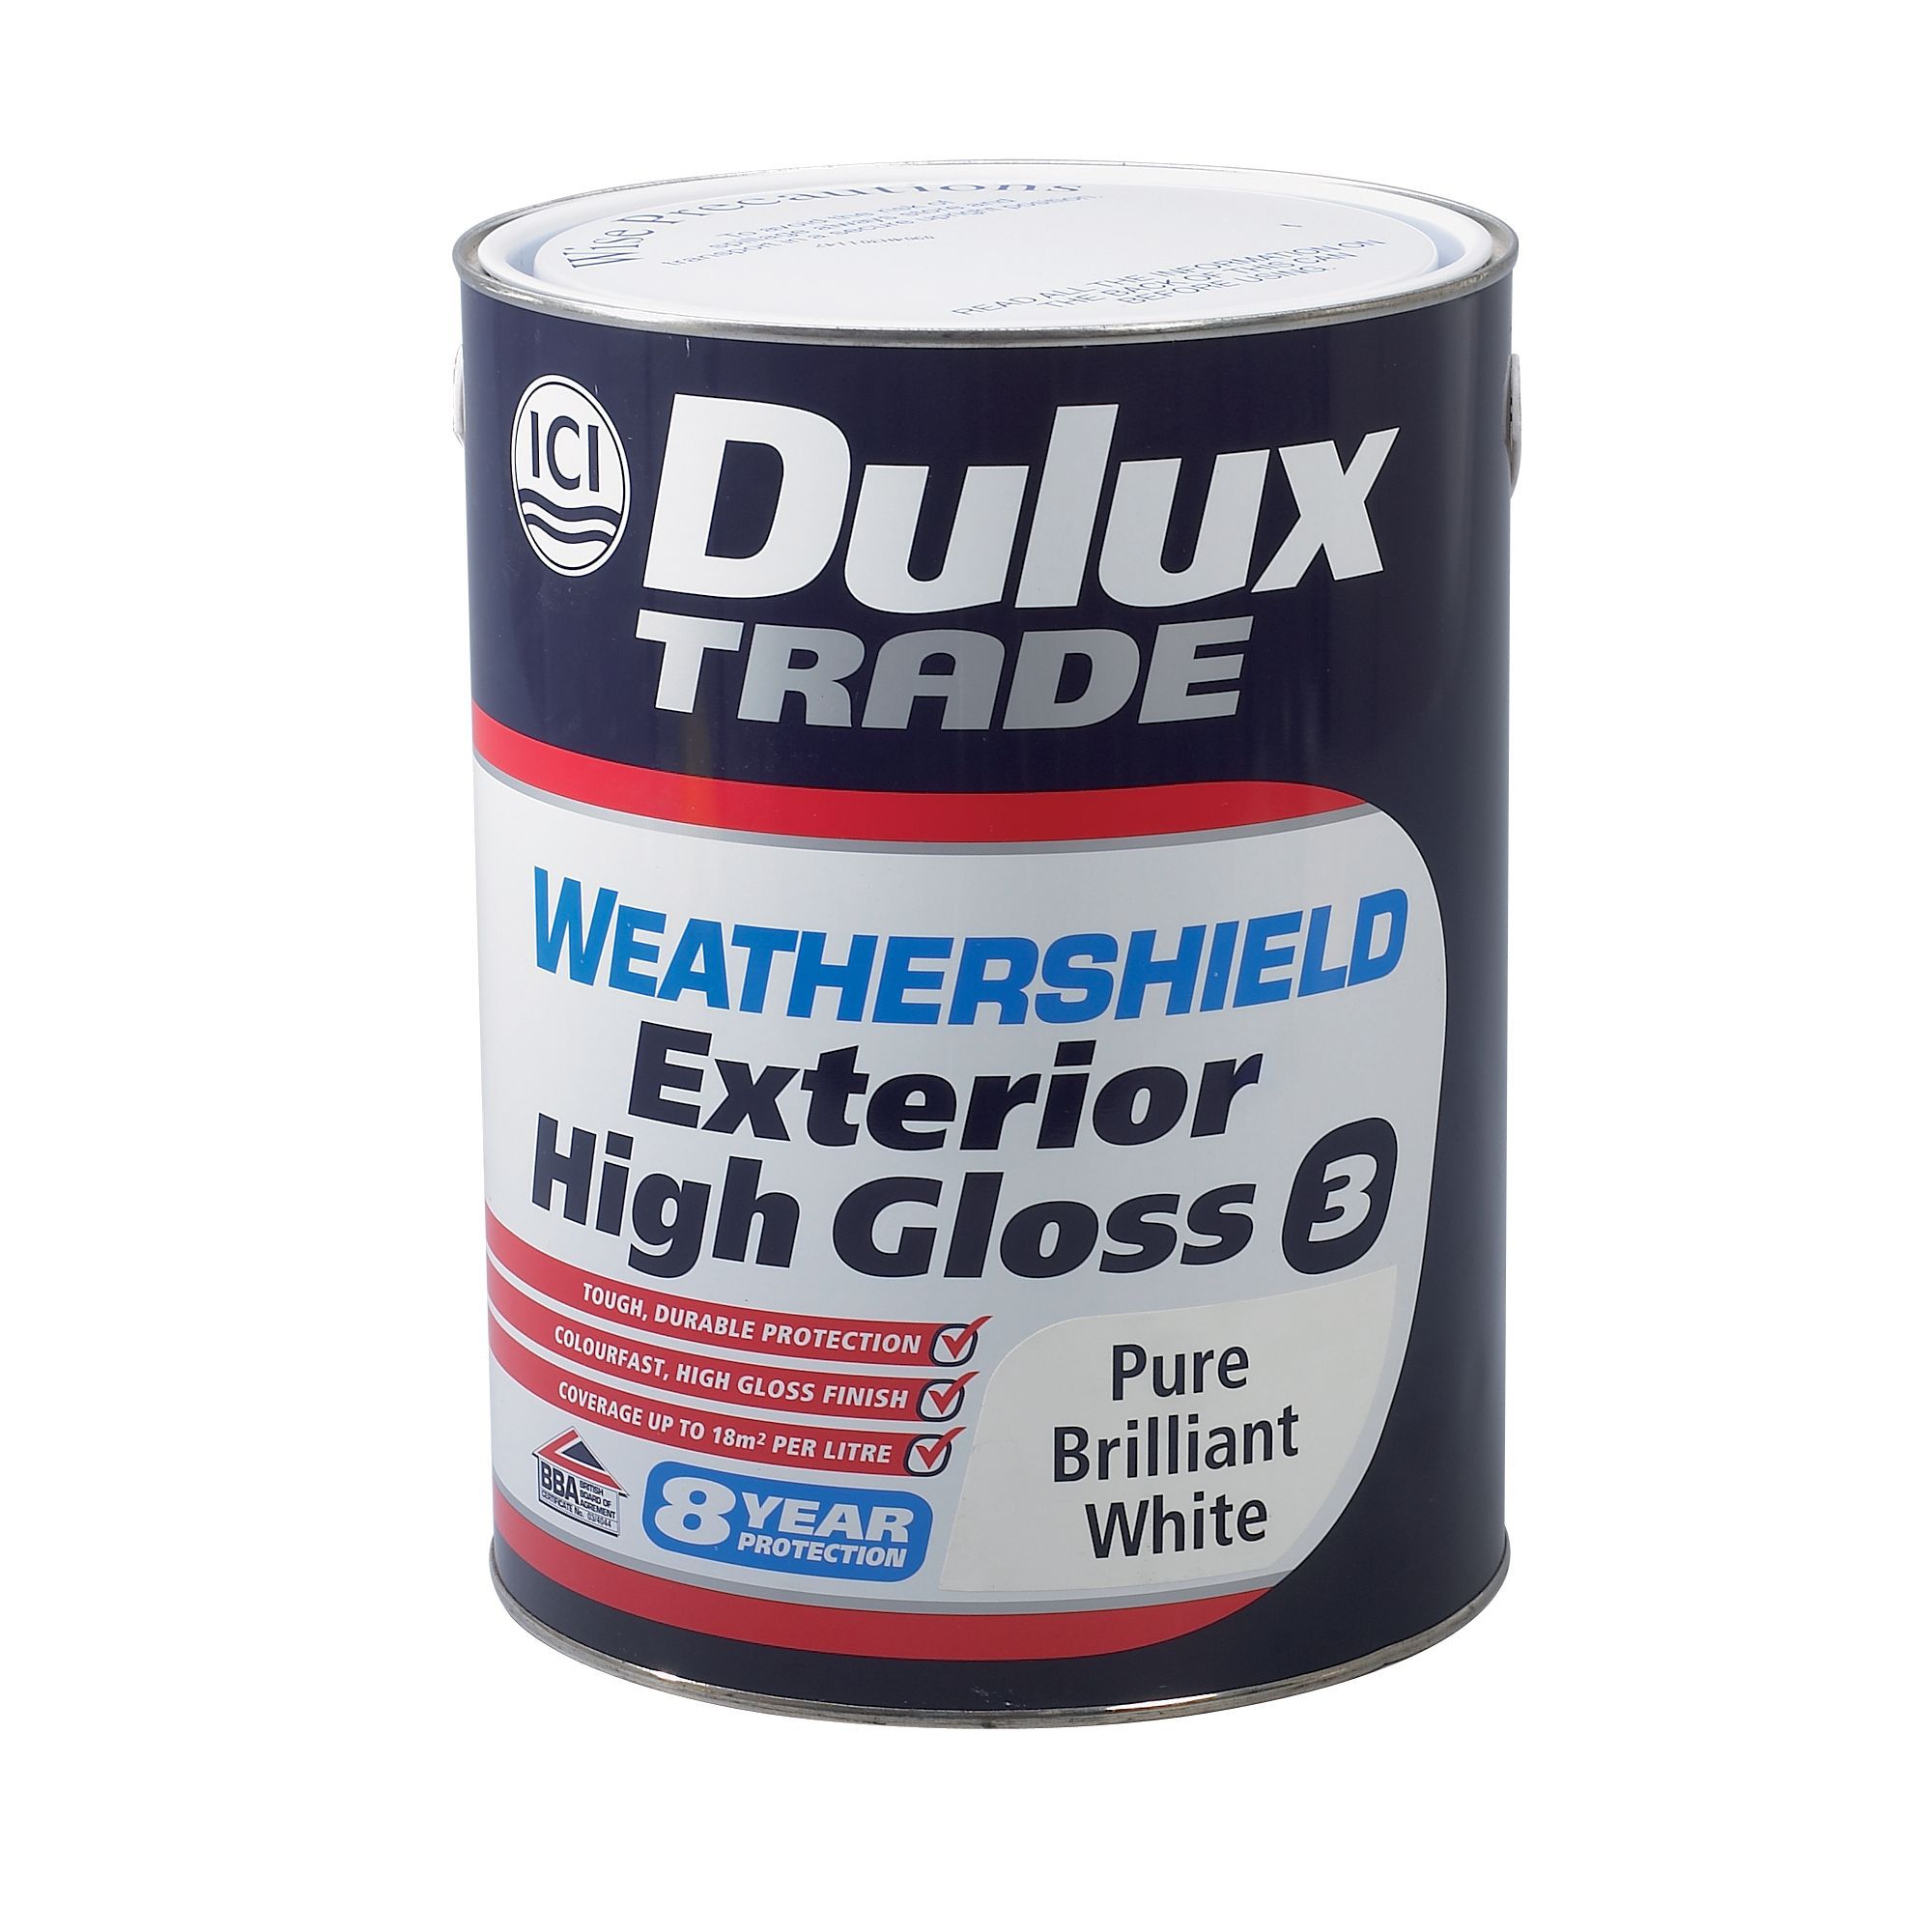 Dulux Trade Pure Brilliant White High Gloss Wall Ceiling Paint 5l Departments Tradepoint